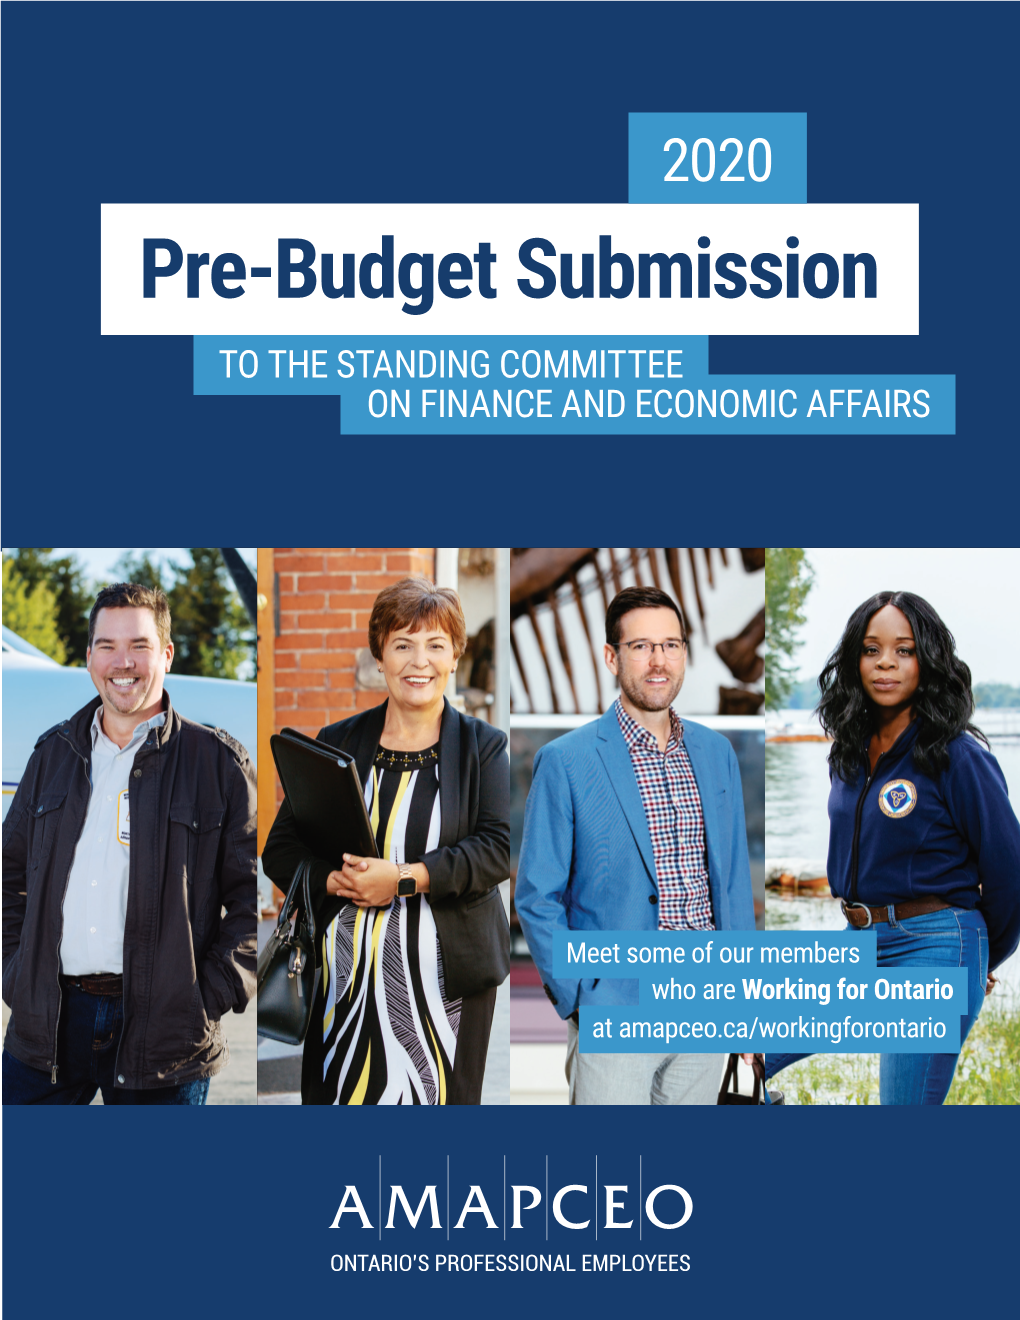 Pre-Budget Submission to the Standing Committee